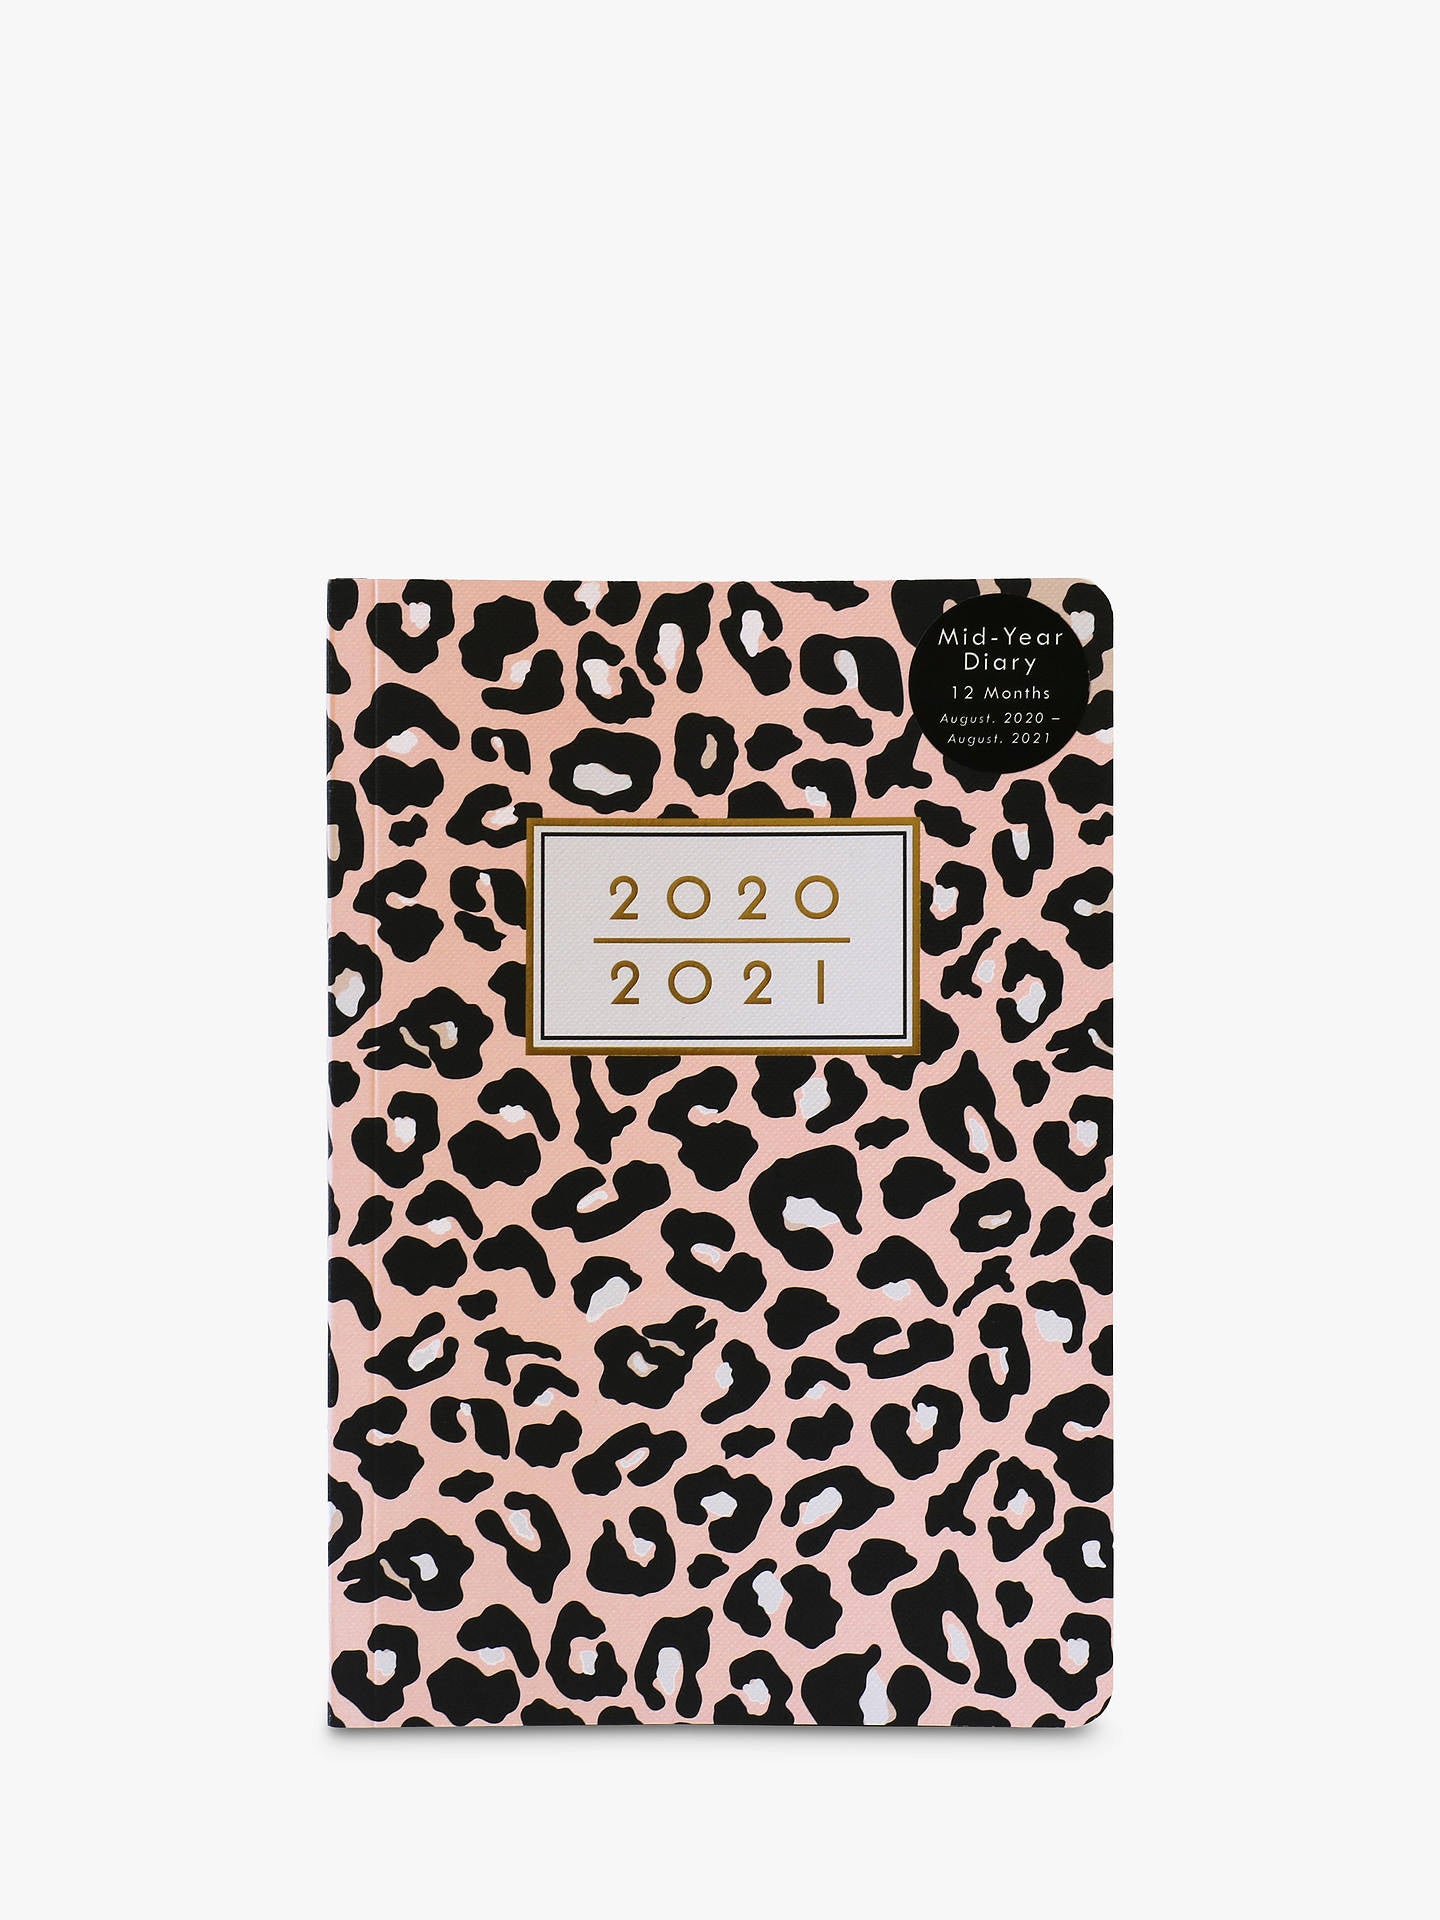 Mid-Year Diary 2020/2021 - Pink Leopard